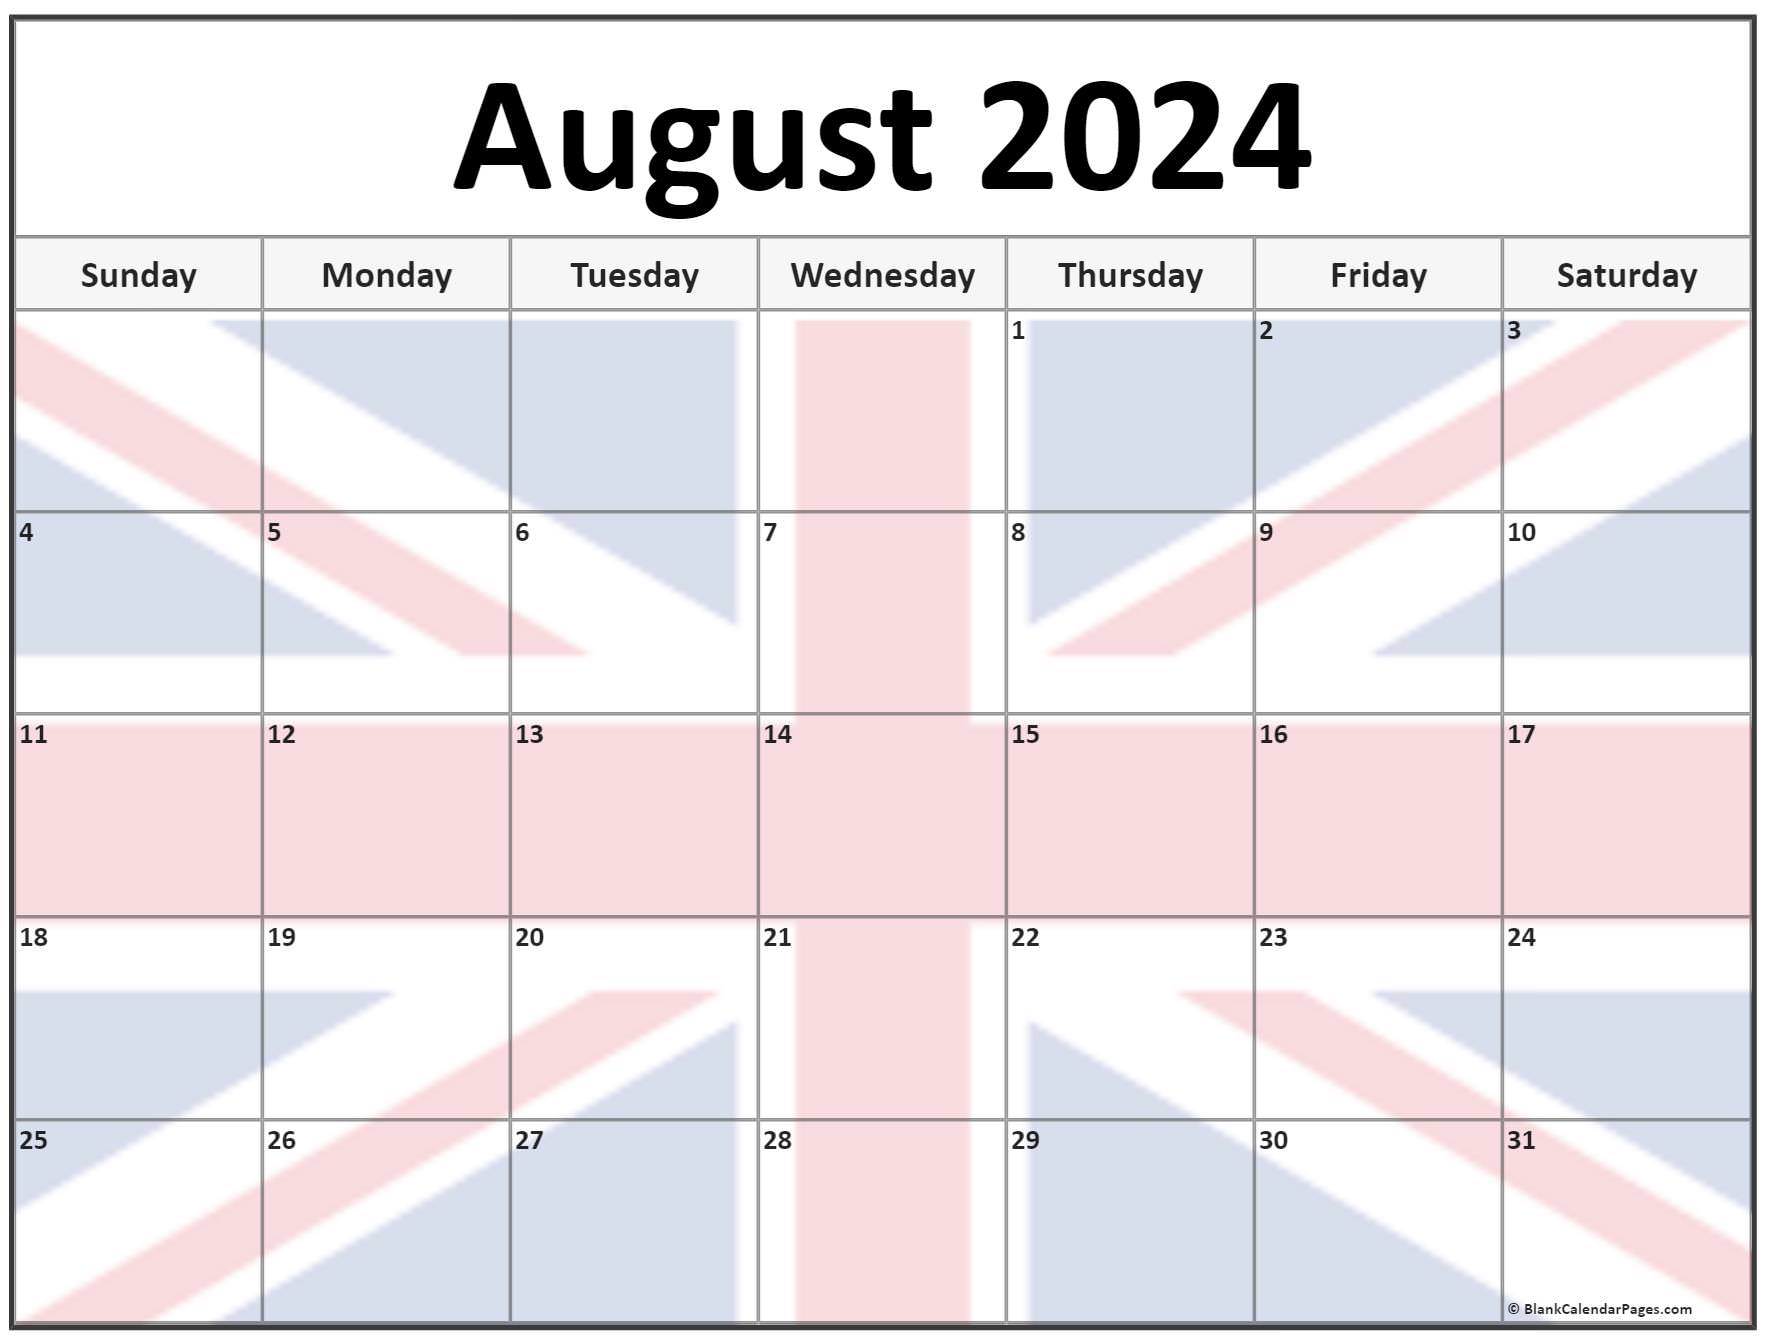 Collection of August 2022 photo calendars with image filters.